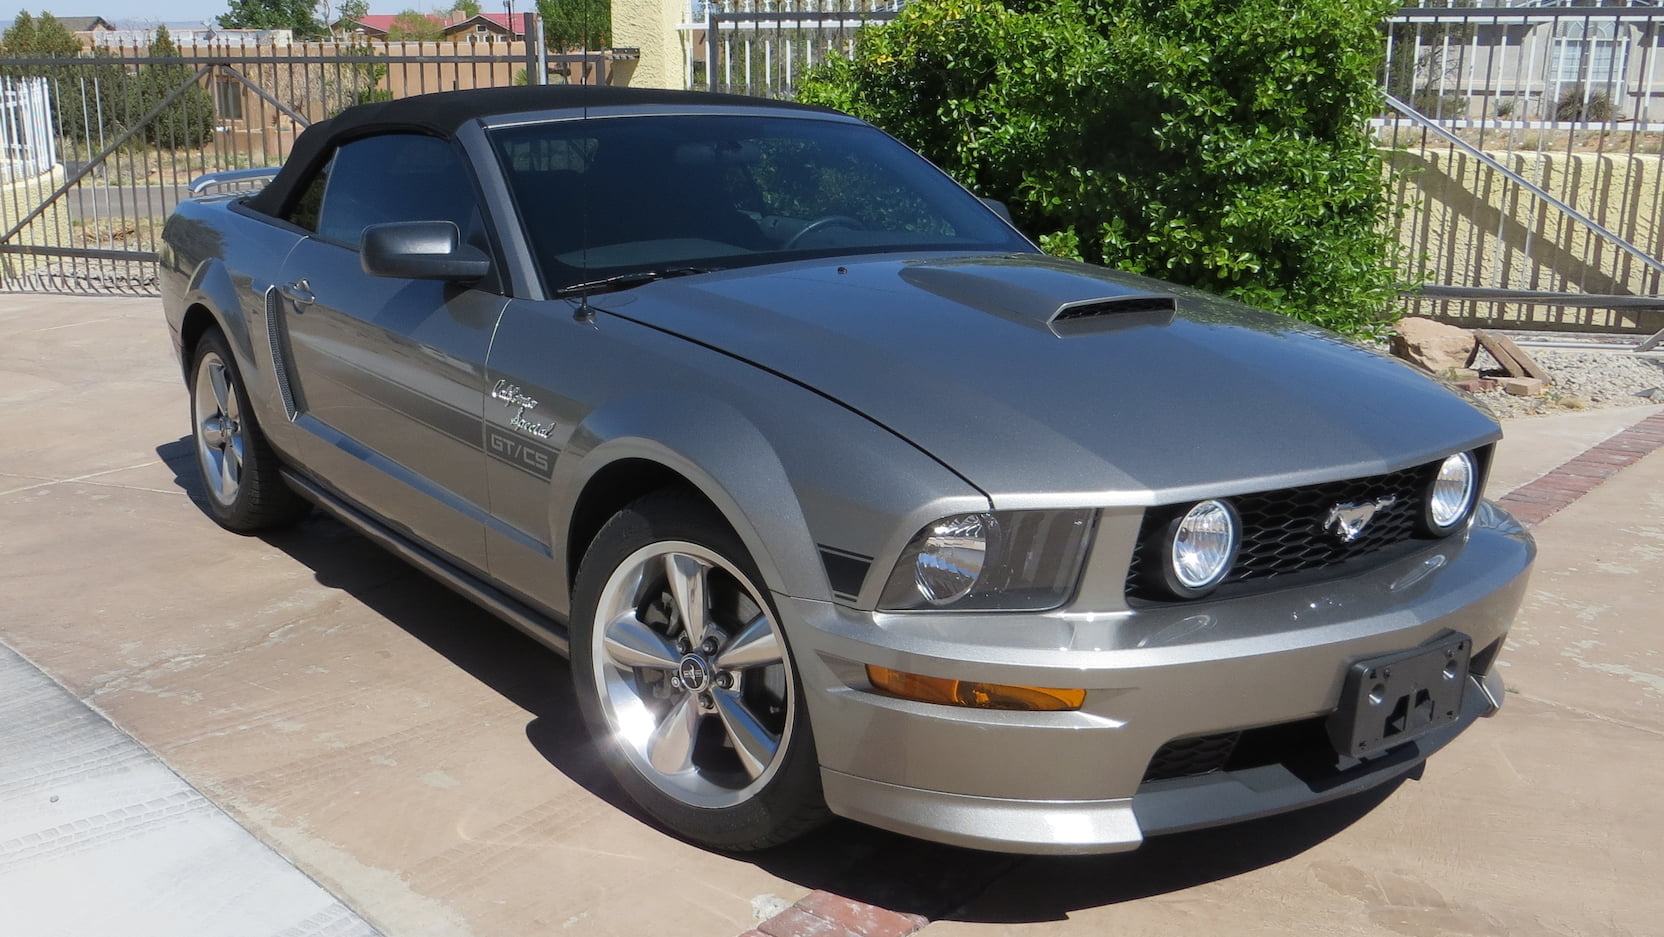 Mustang Of The Day: 2009 Ford Mustang GT/CS California Special